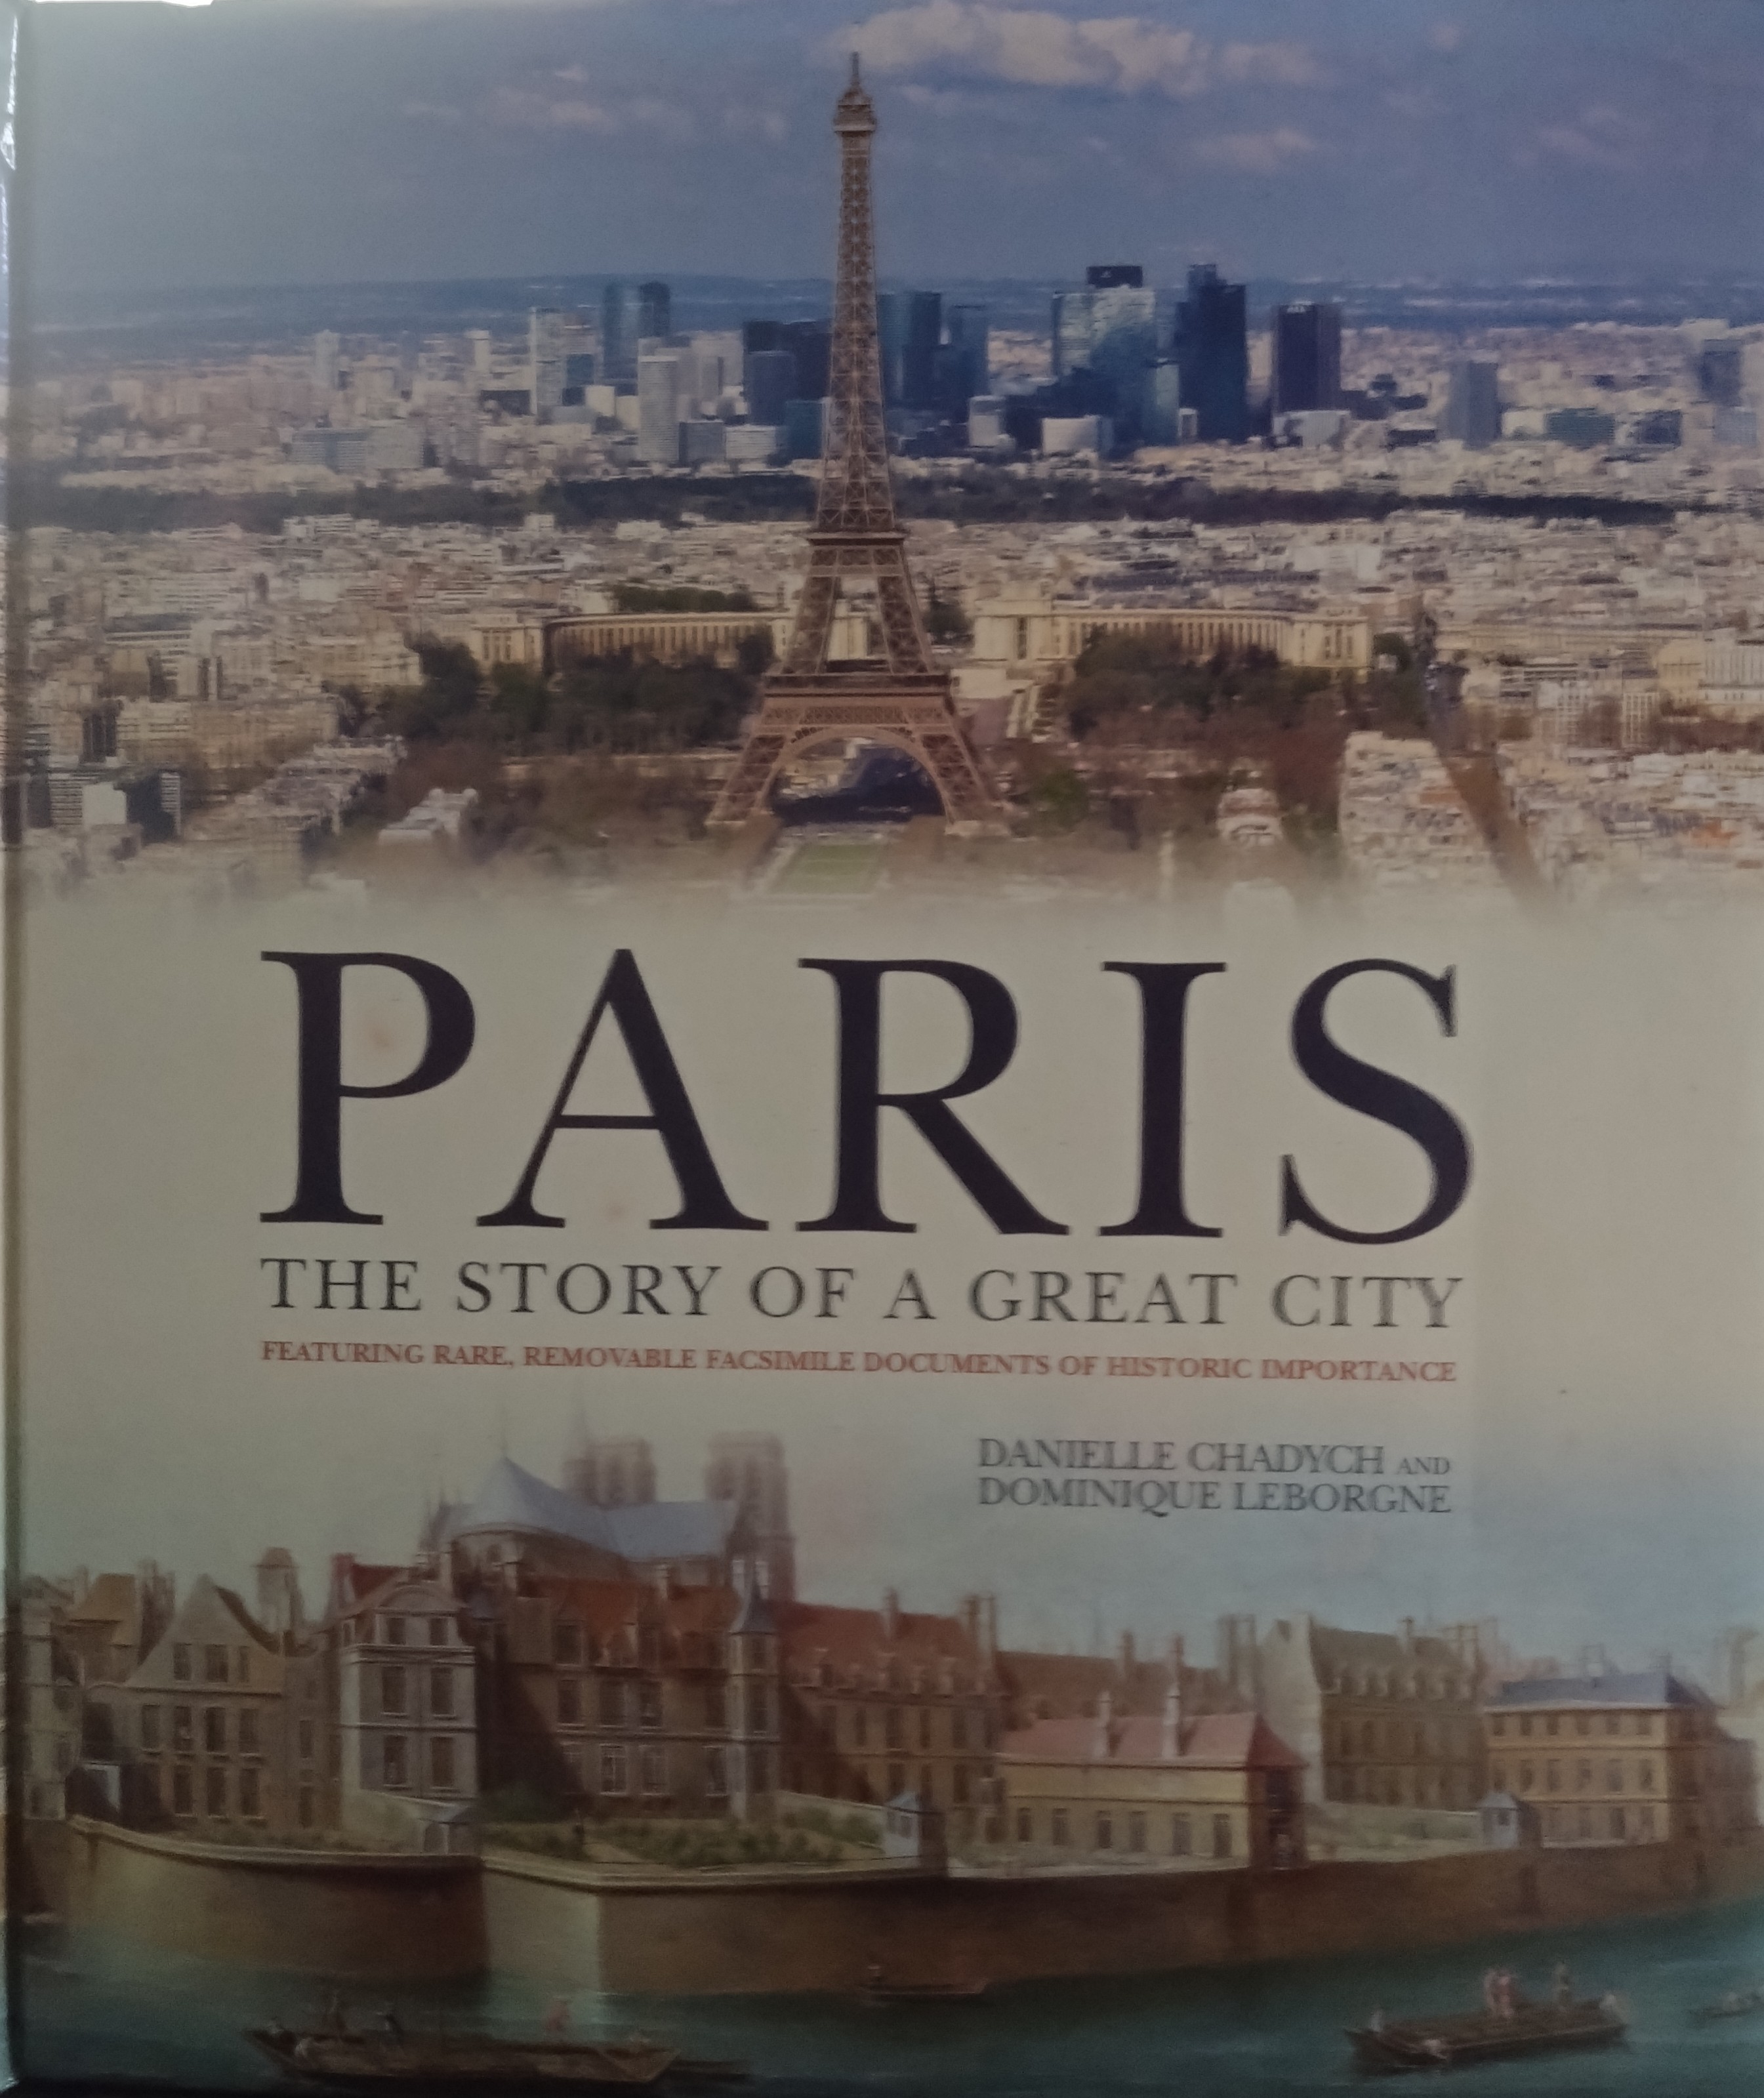 Paris The Story of a Great City